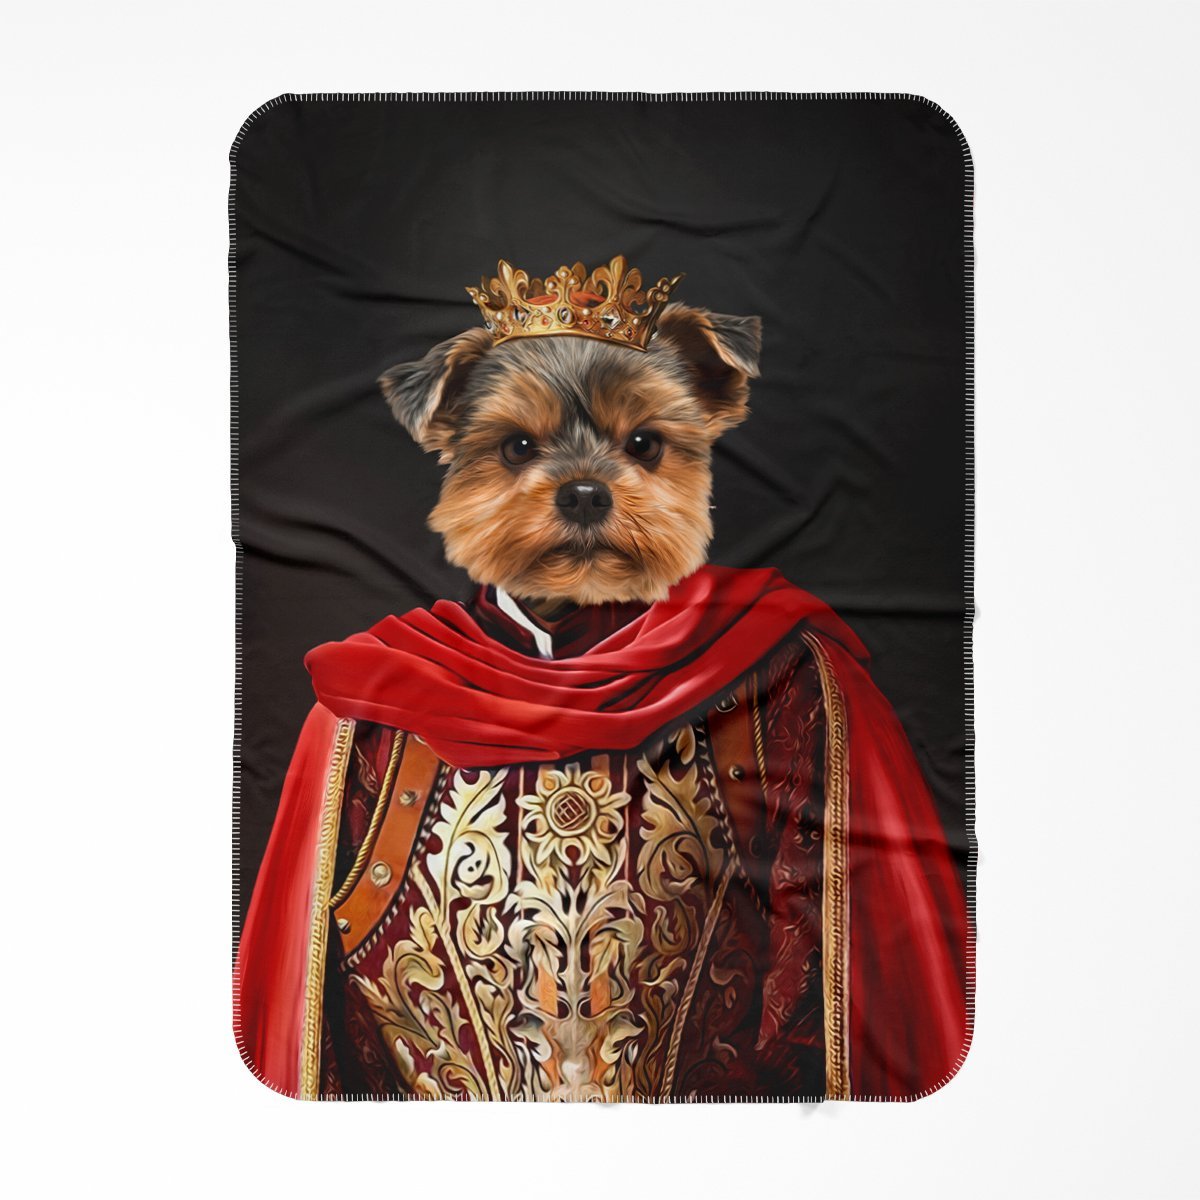 The Young King: Custom Pet Blanket - Paw & Glory - #pet portraits# - #dog portraits# - #pet portraits uk#Paw and glory, Pet portraits blanket,blankets with your dog on it, fleece blanket with dog picture, dog on blanket, custom blanket with dogs face, pet pic blanket